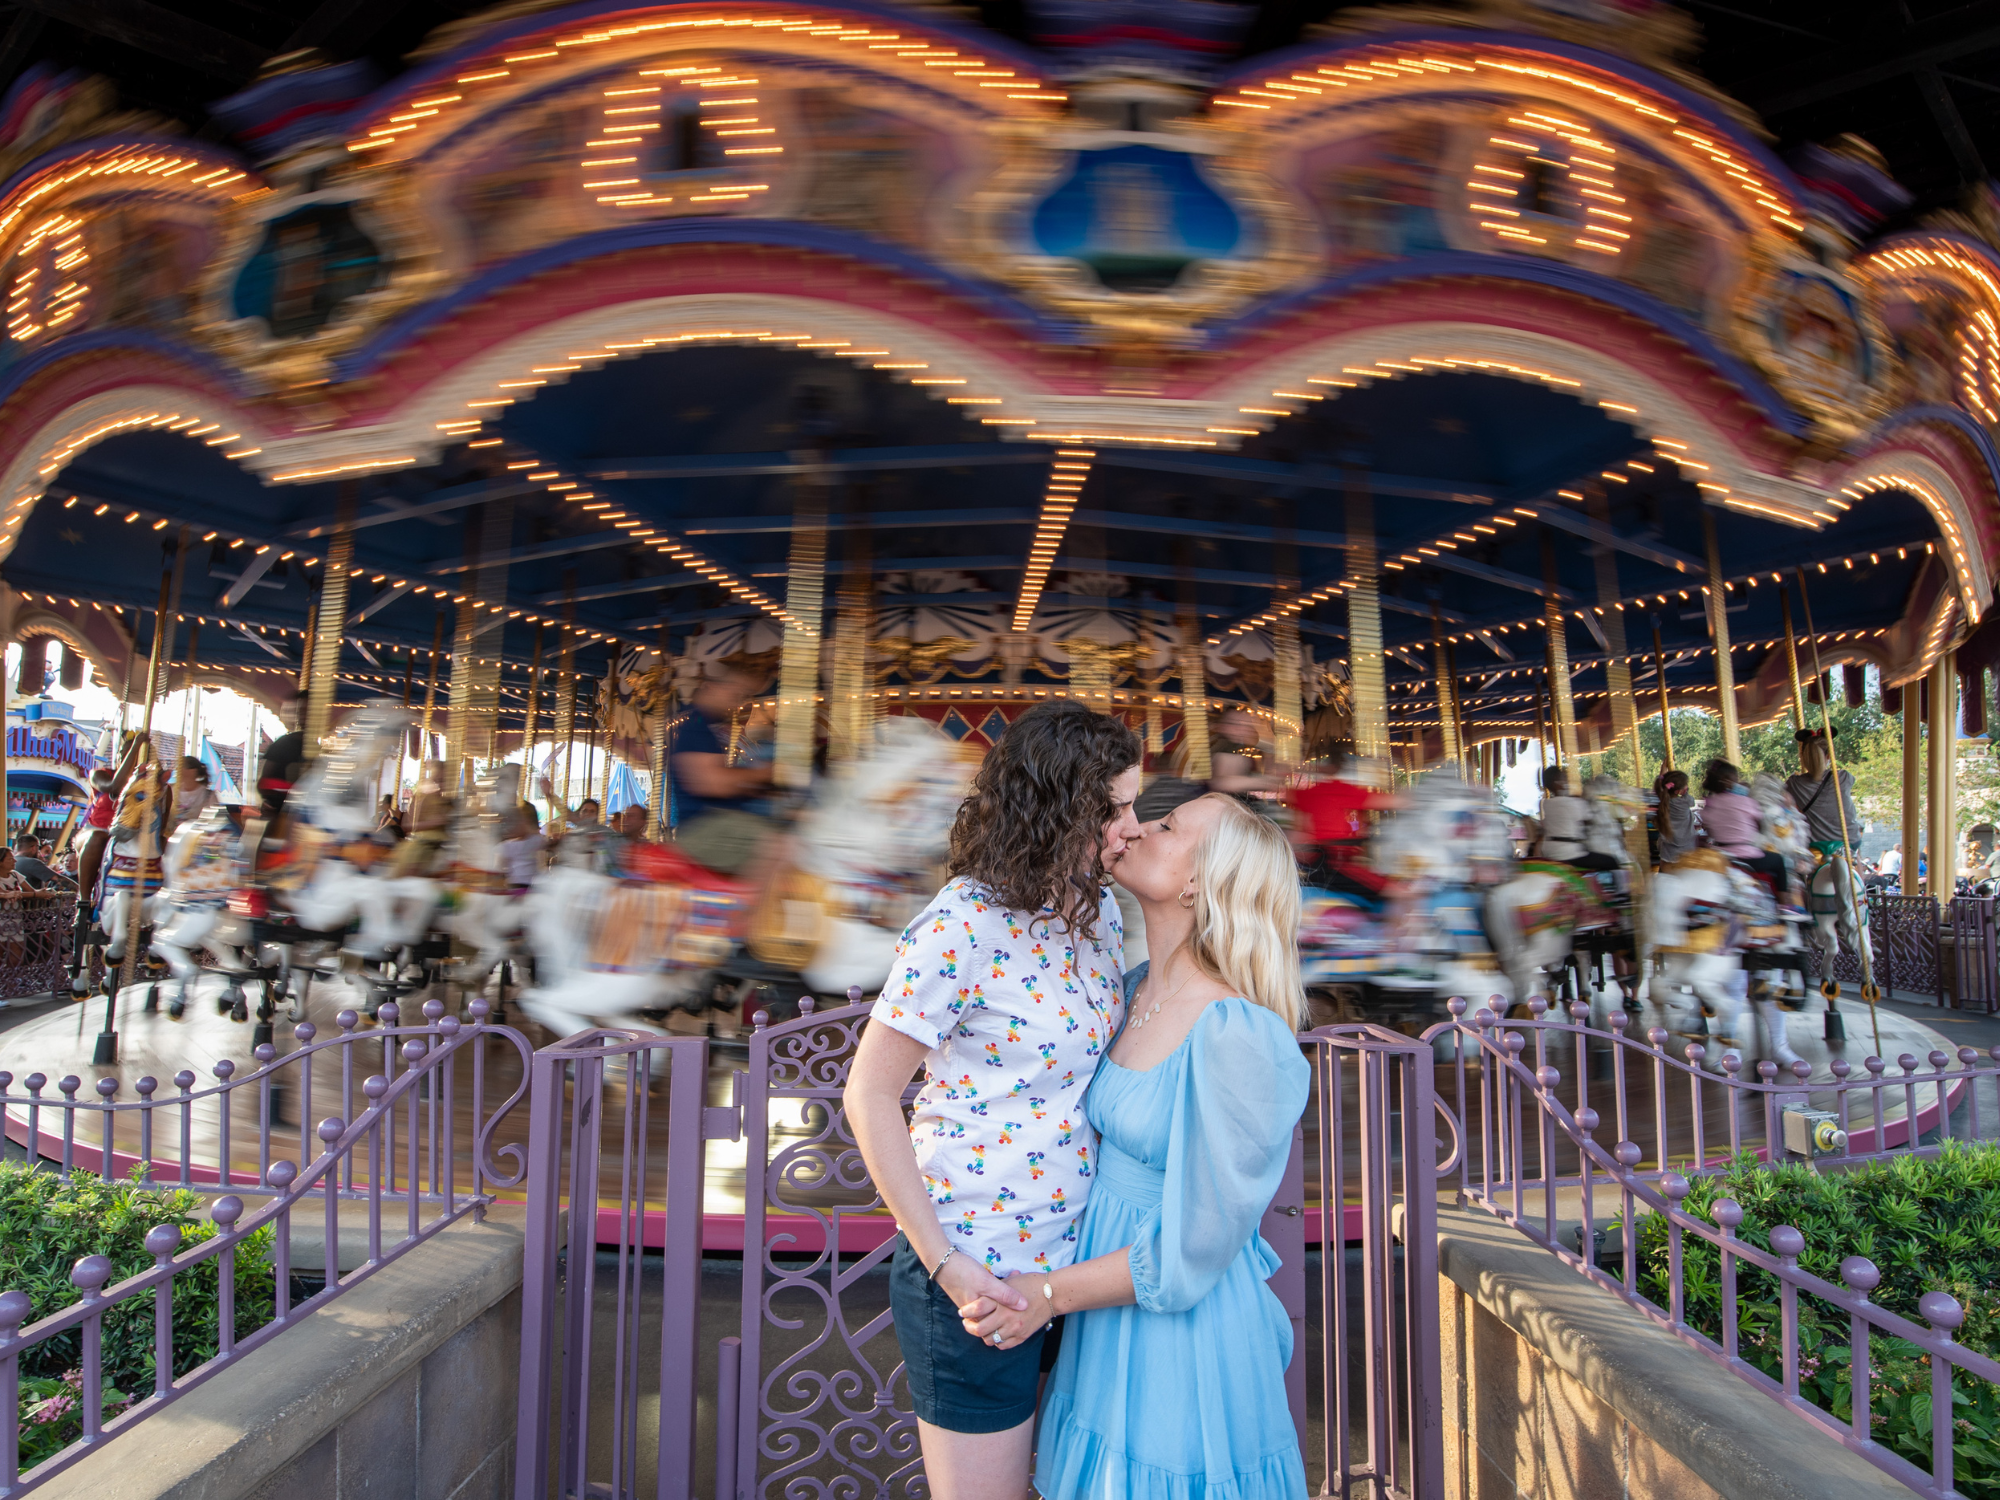 Cute Kiss Engagement Photo in Front of Prince Charming Regal Carrousel Disney Engagement Photo Inspiration